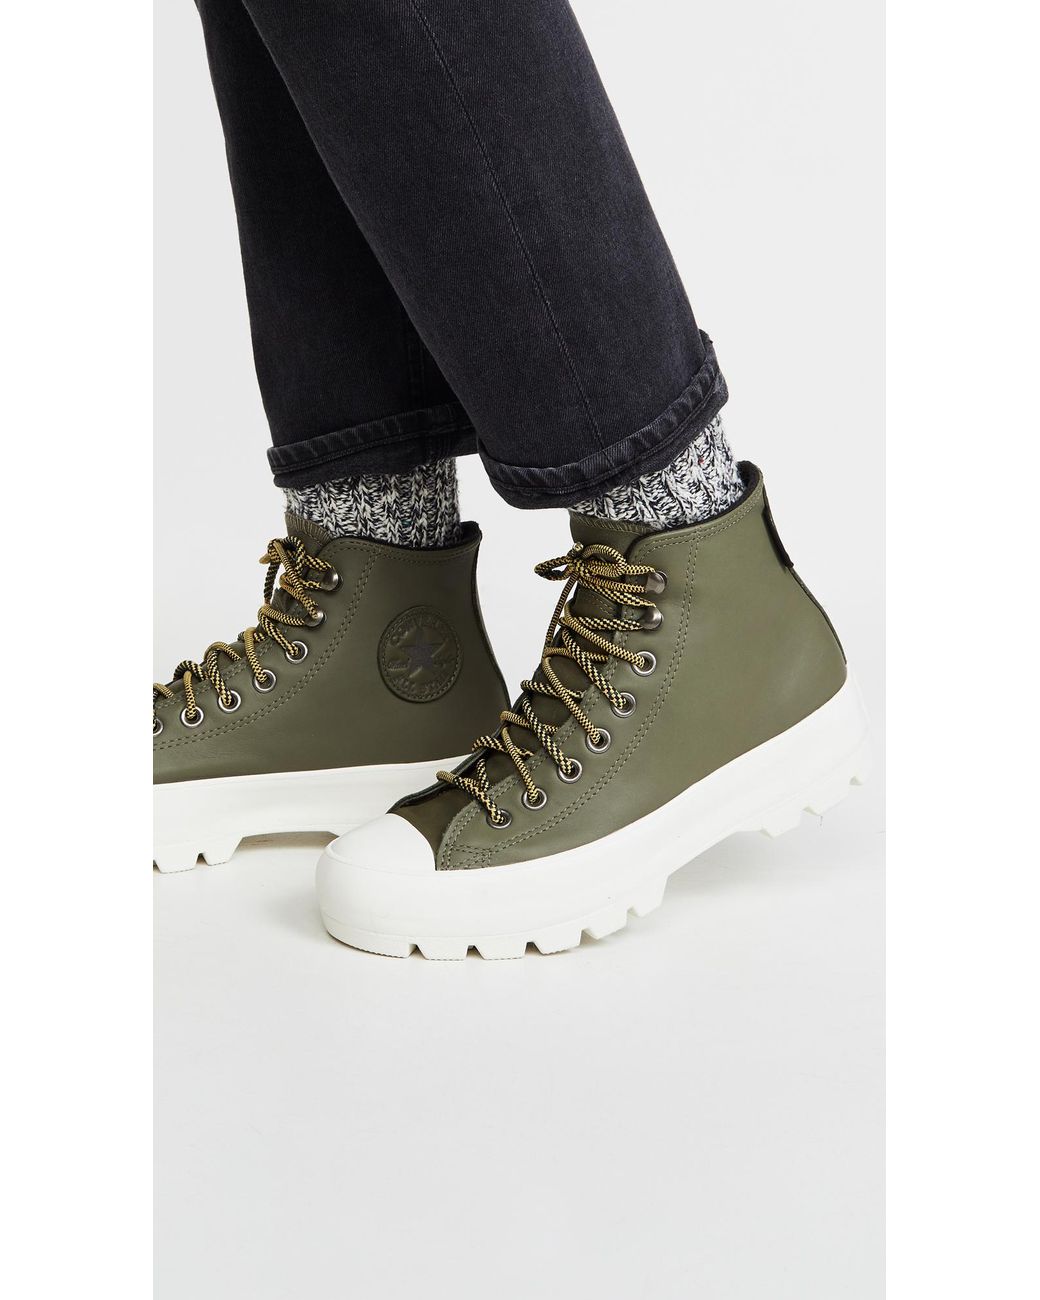 Converse Chuck Taylor All Star Lugged Waterproof Sneakers in Green | Lyst  Canada